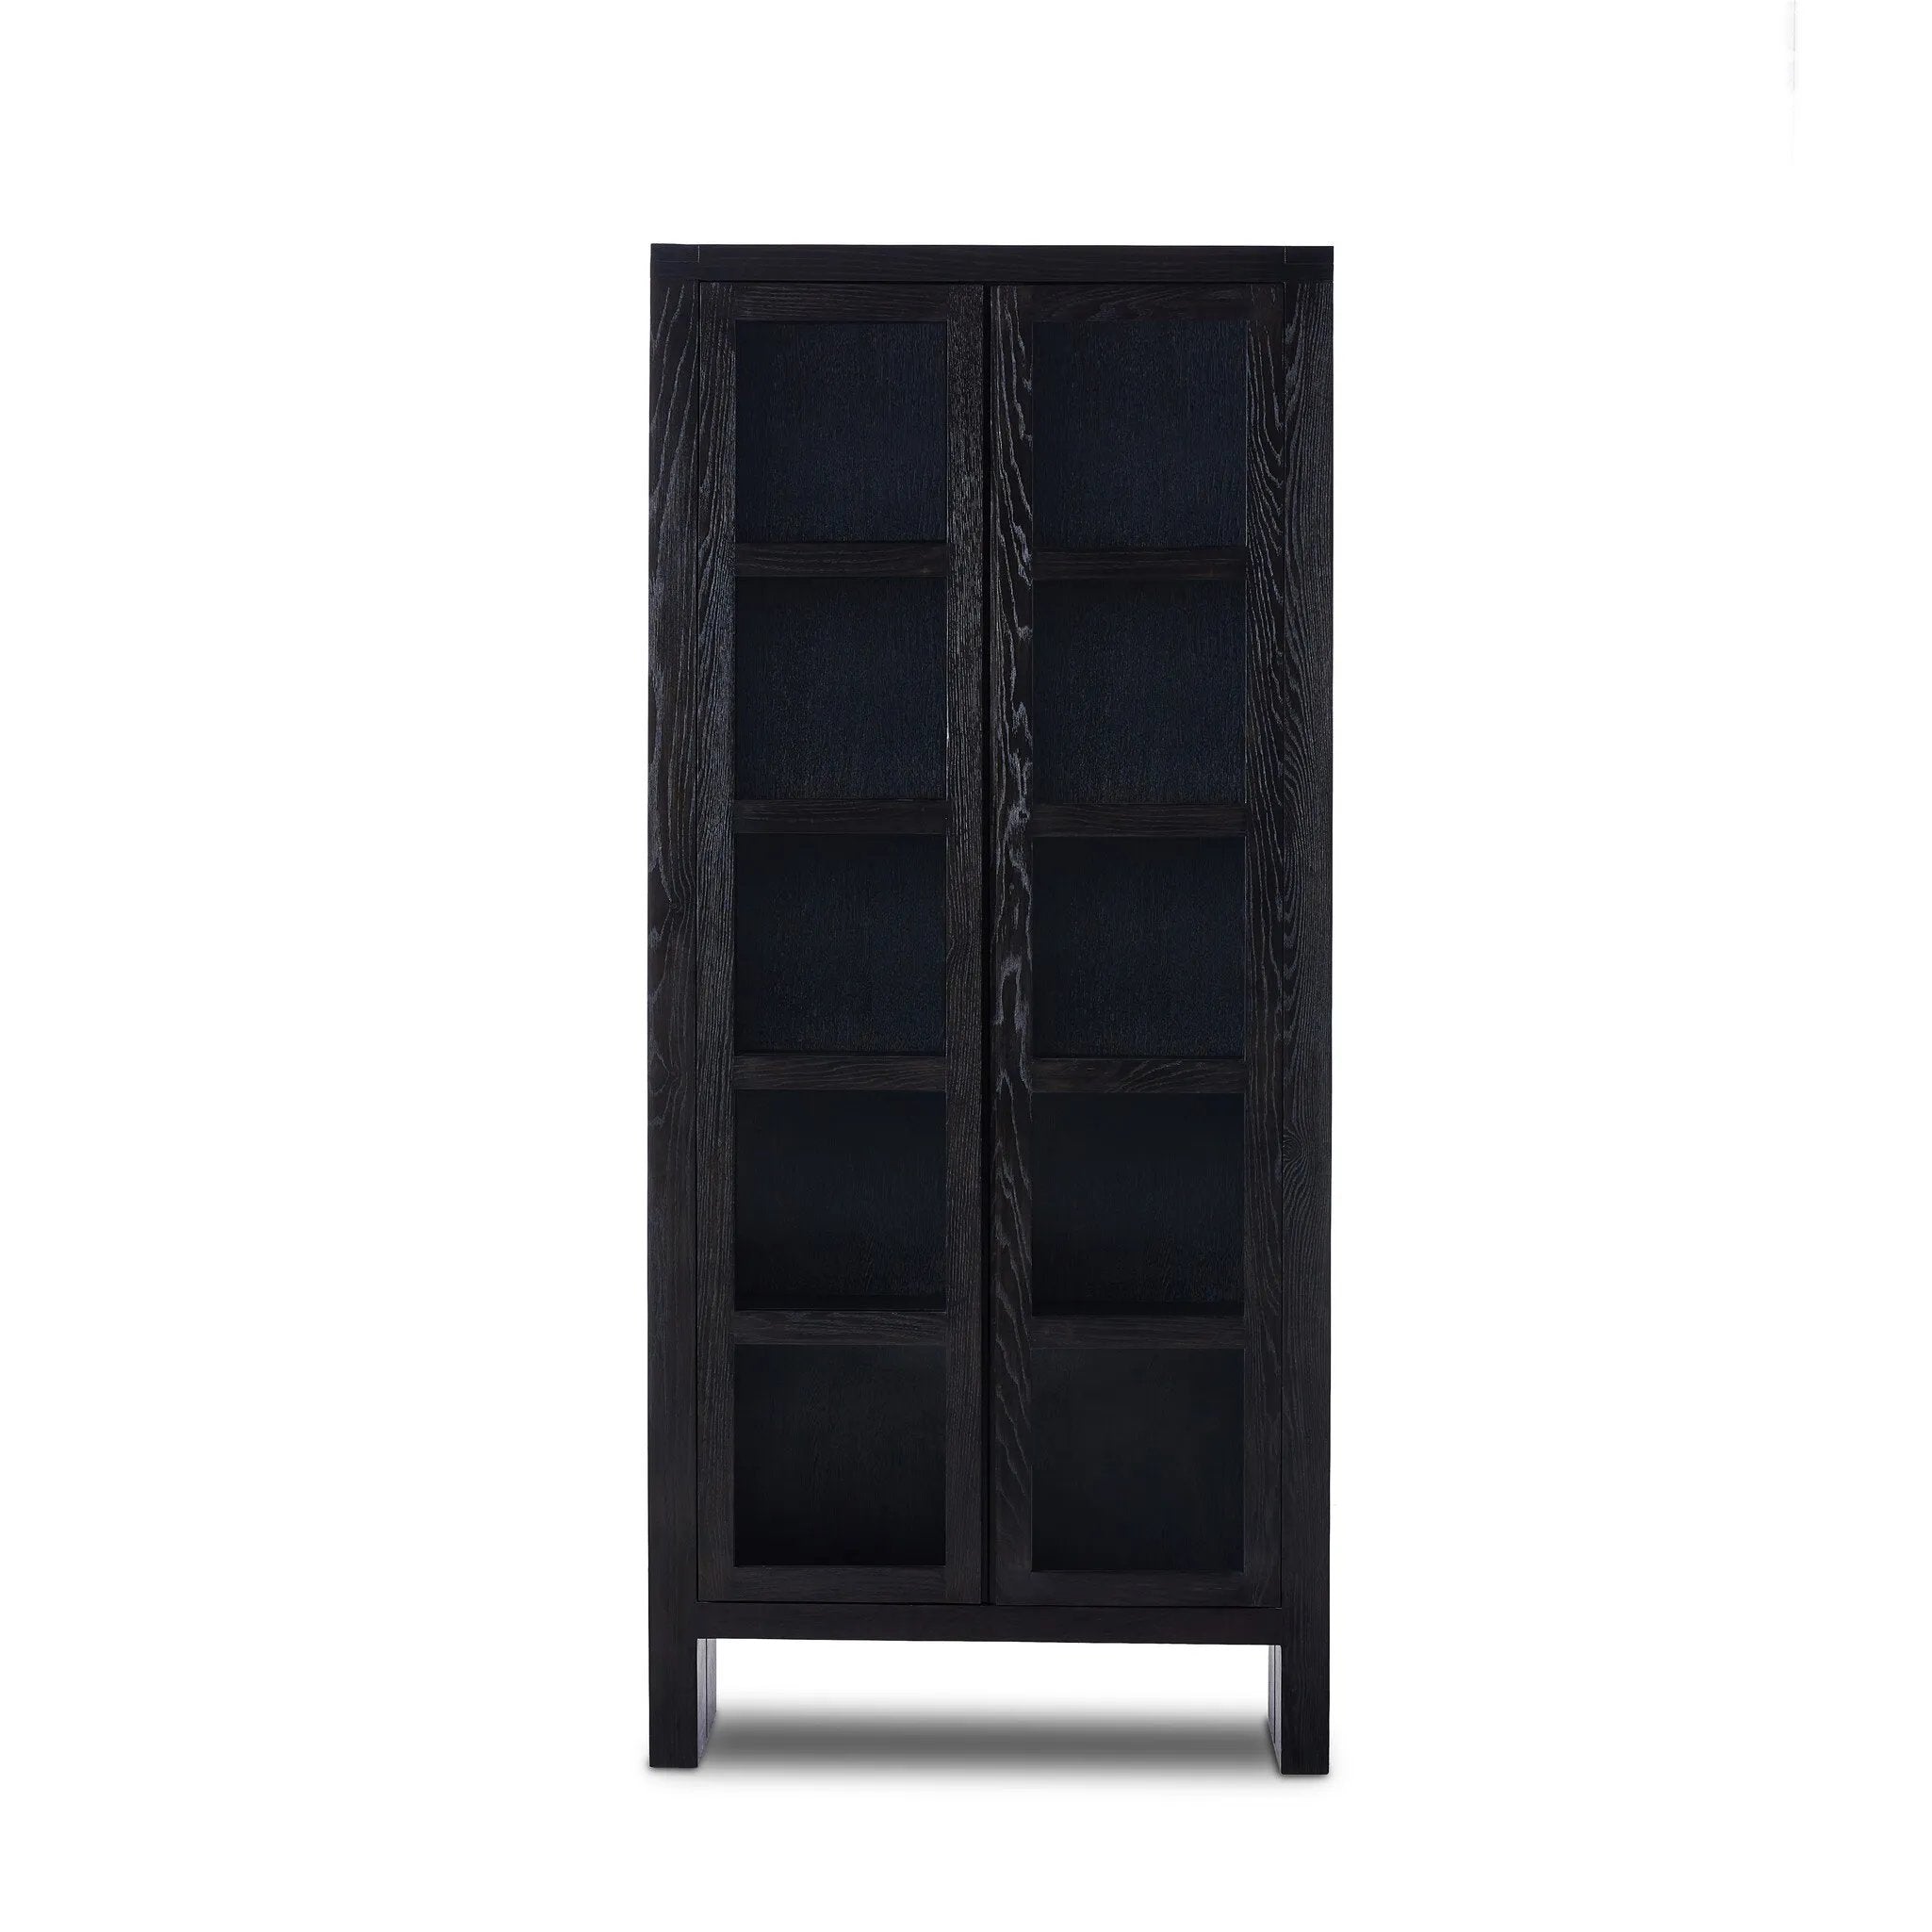 This minimal-inspired bookcase is crafted from a mix of solid oak and worn black veneer. Featuring glass-front doors and spacious shelves for storage and display.Collection: Bennet Amethyst Home provides interior design, new home construction design consulting, vintage area rugs, and lighting in the Charlotte metro area.